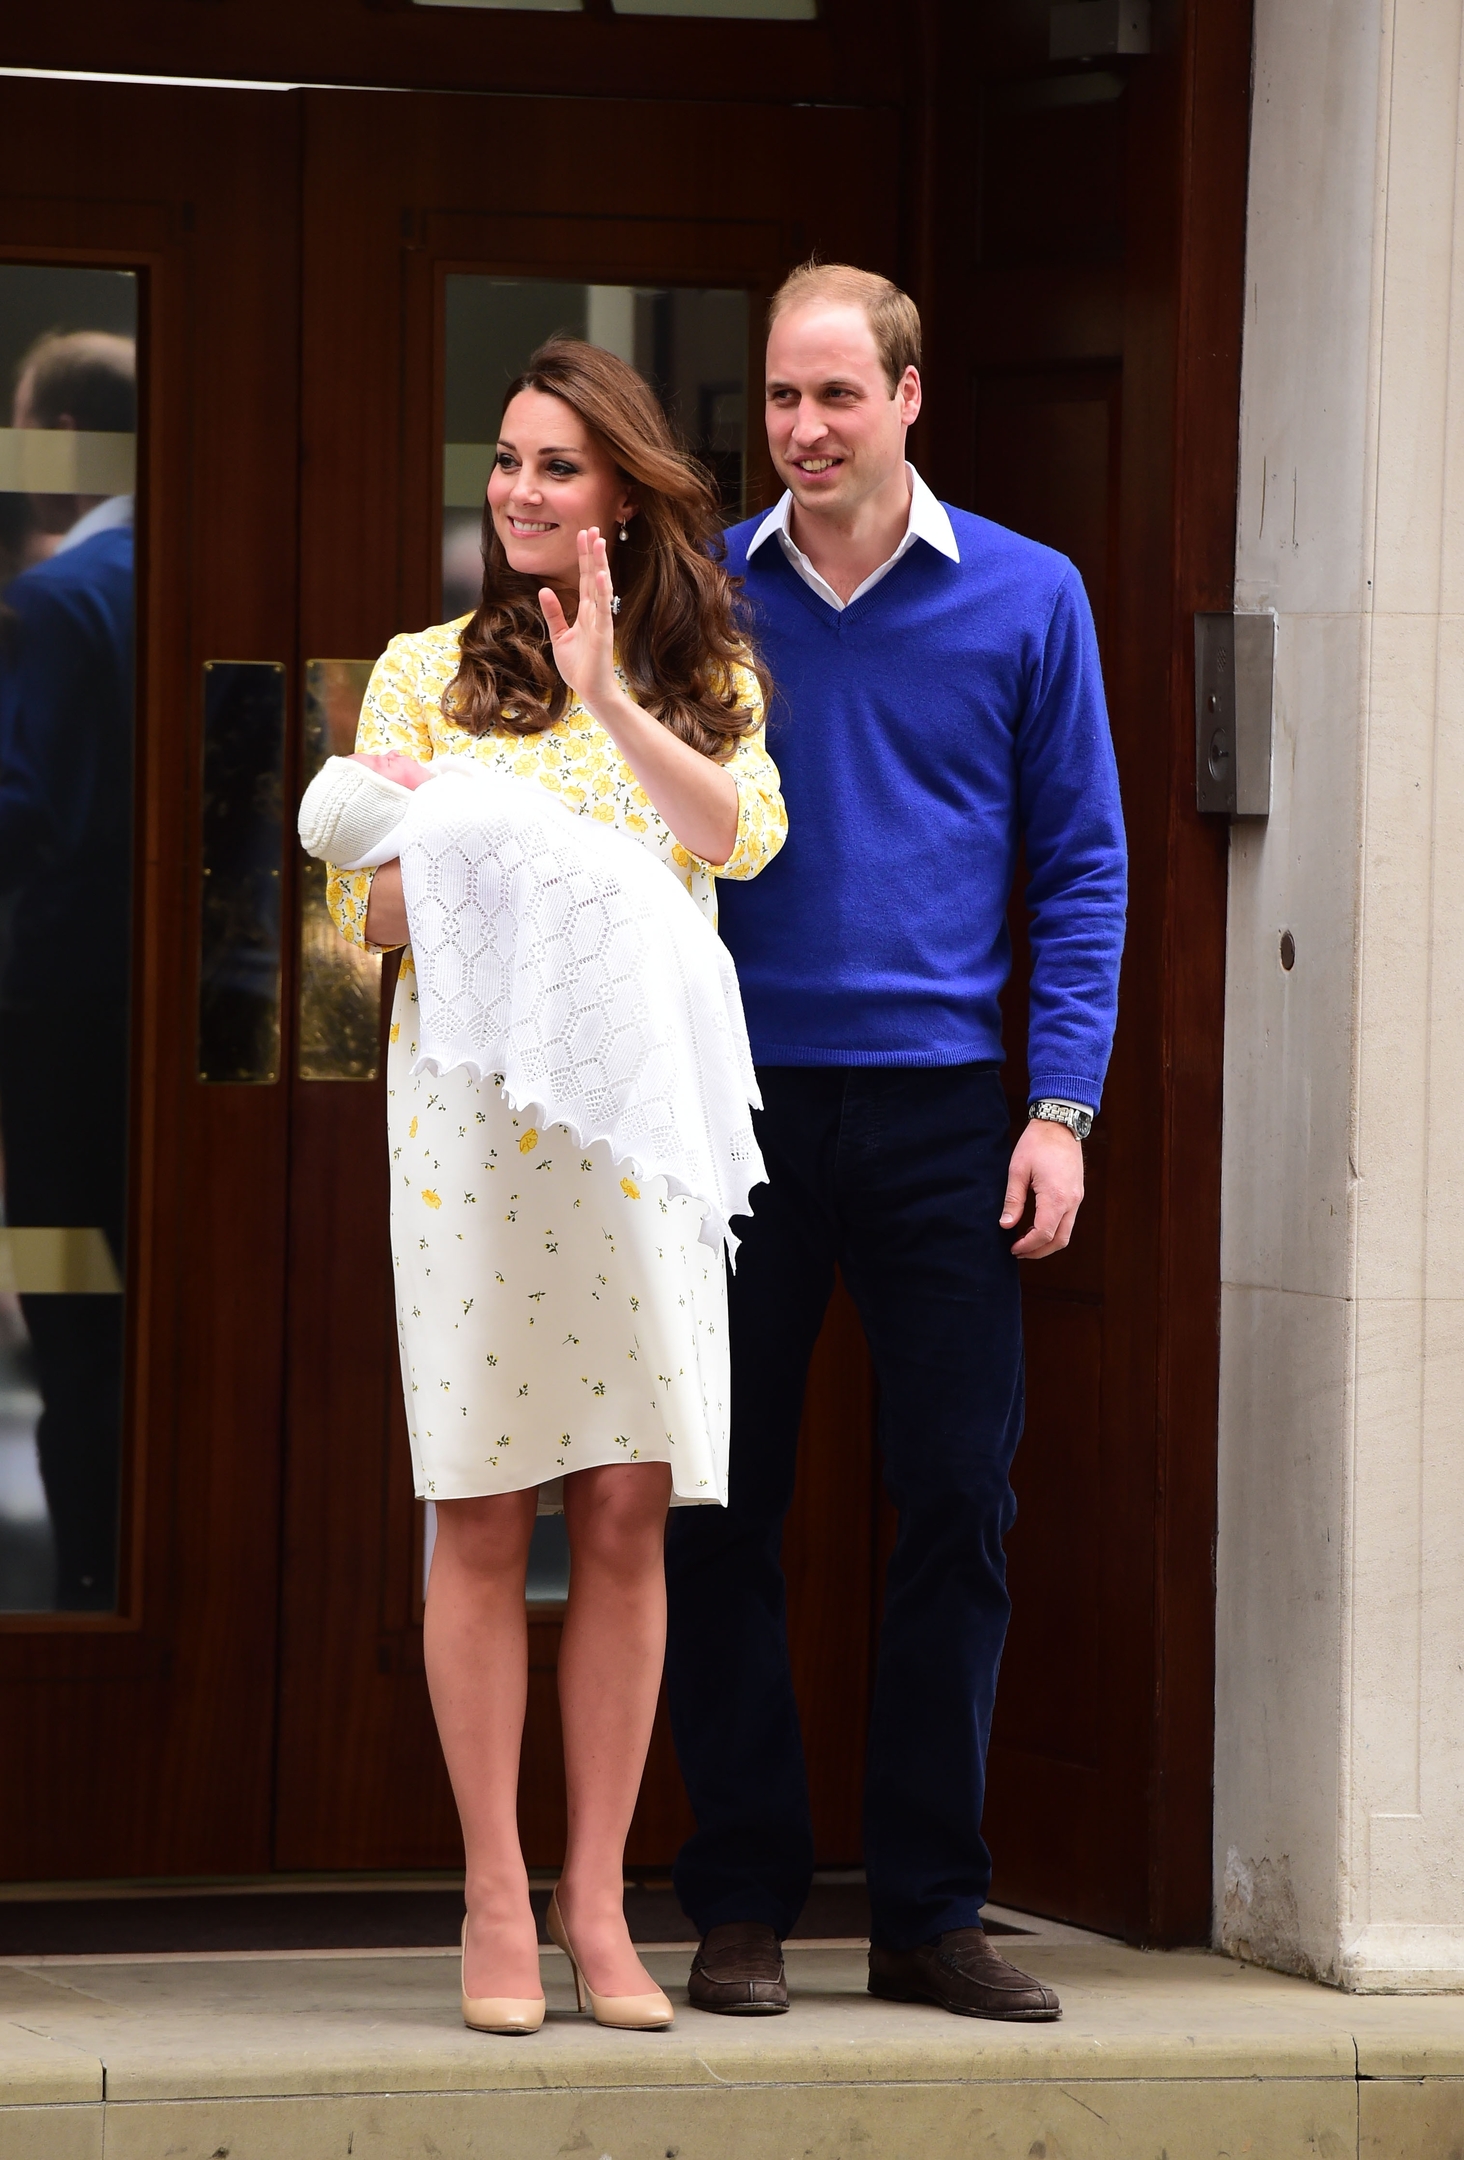 The Duke and Duchess of Cambridge and the newborn Princess of Cambridge as they leave the Lindo Wing of St Mary's Hospital in London.